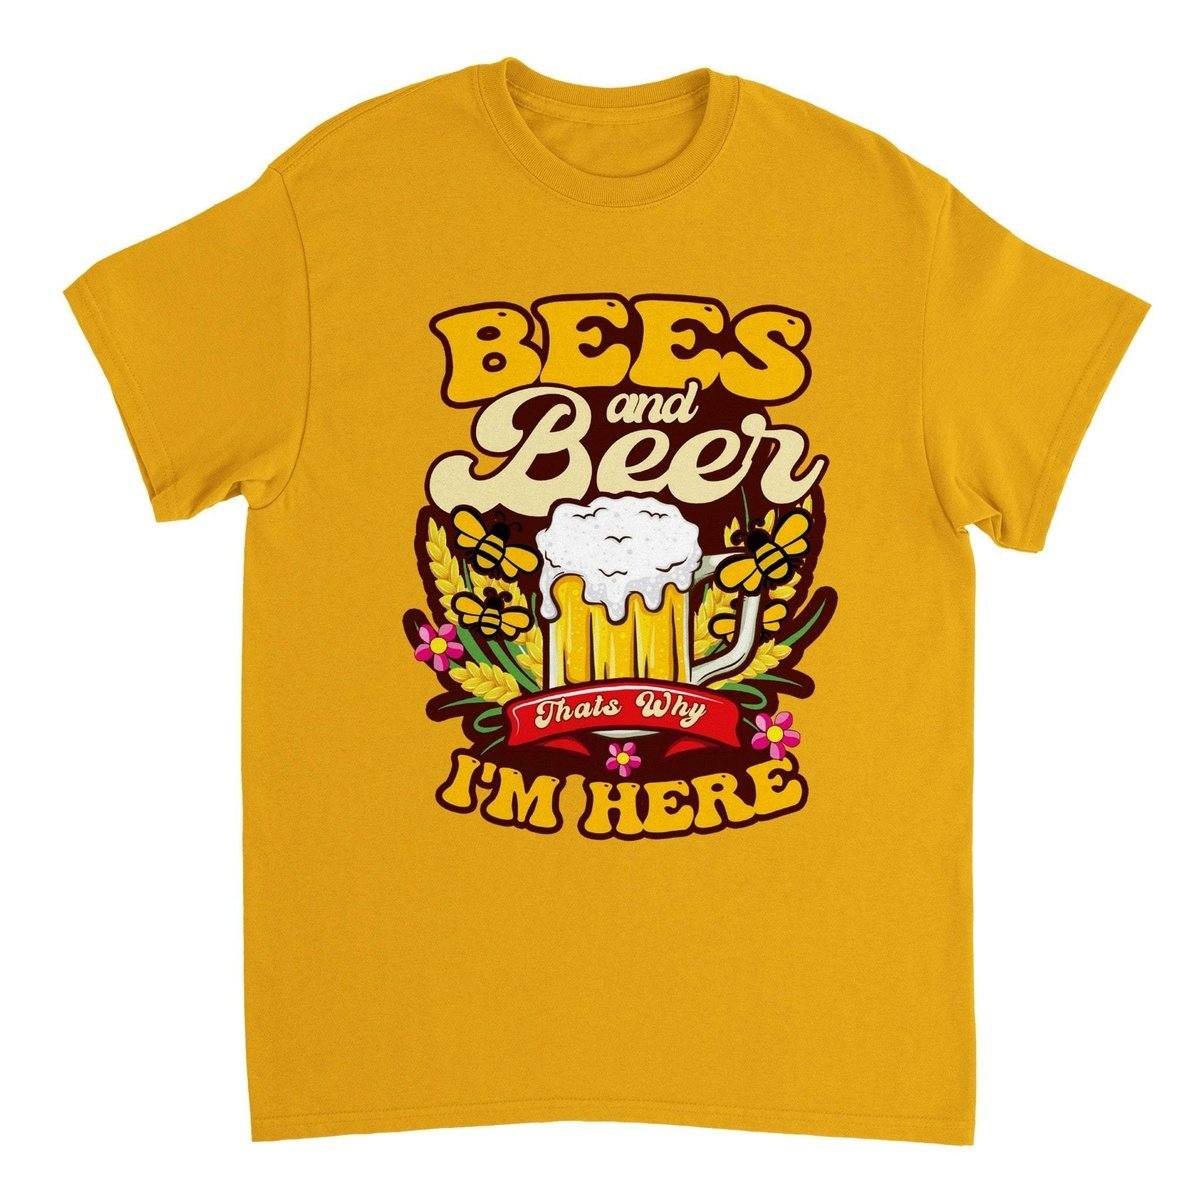 Bees And Beer Thats Why Im Here T-Shirt - Funny Bee Beer Tshirt - Unisex Crewneck T-shirt Australia Online Color Gold / S